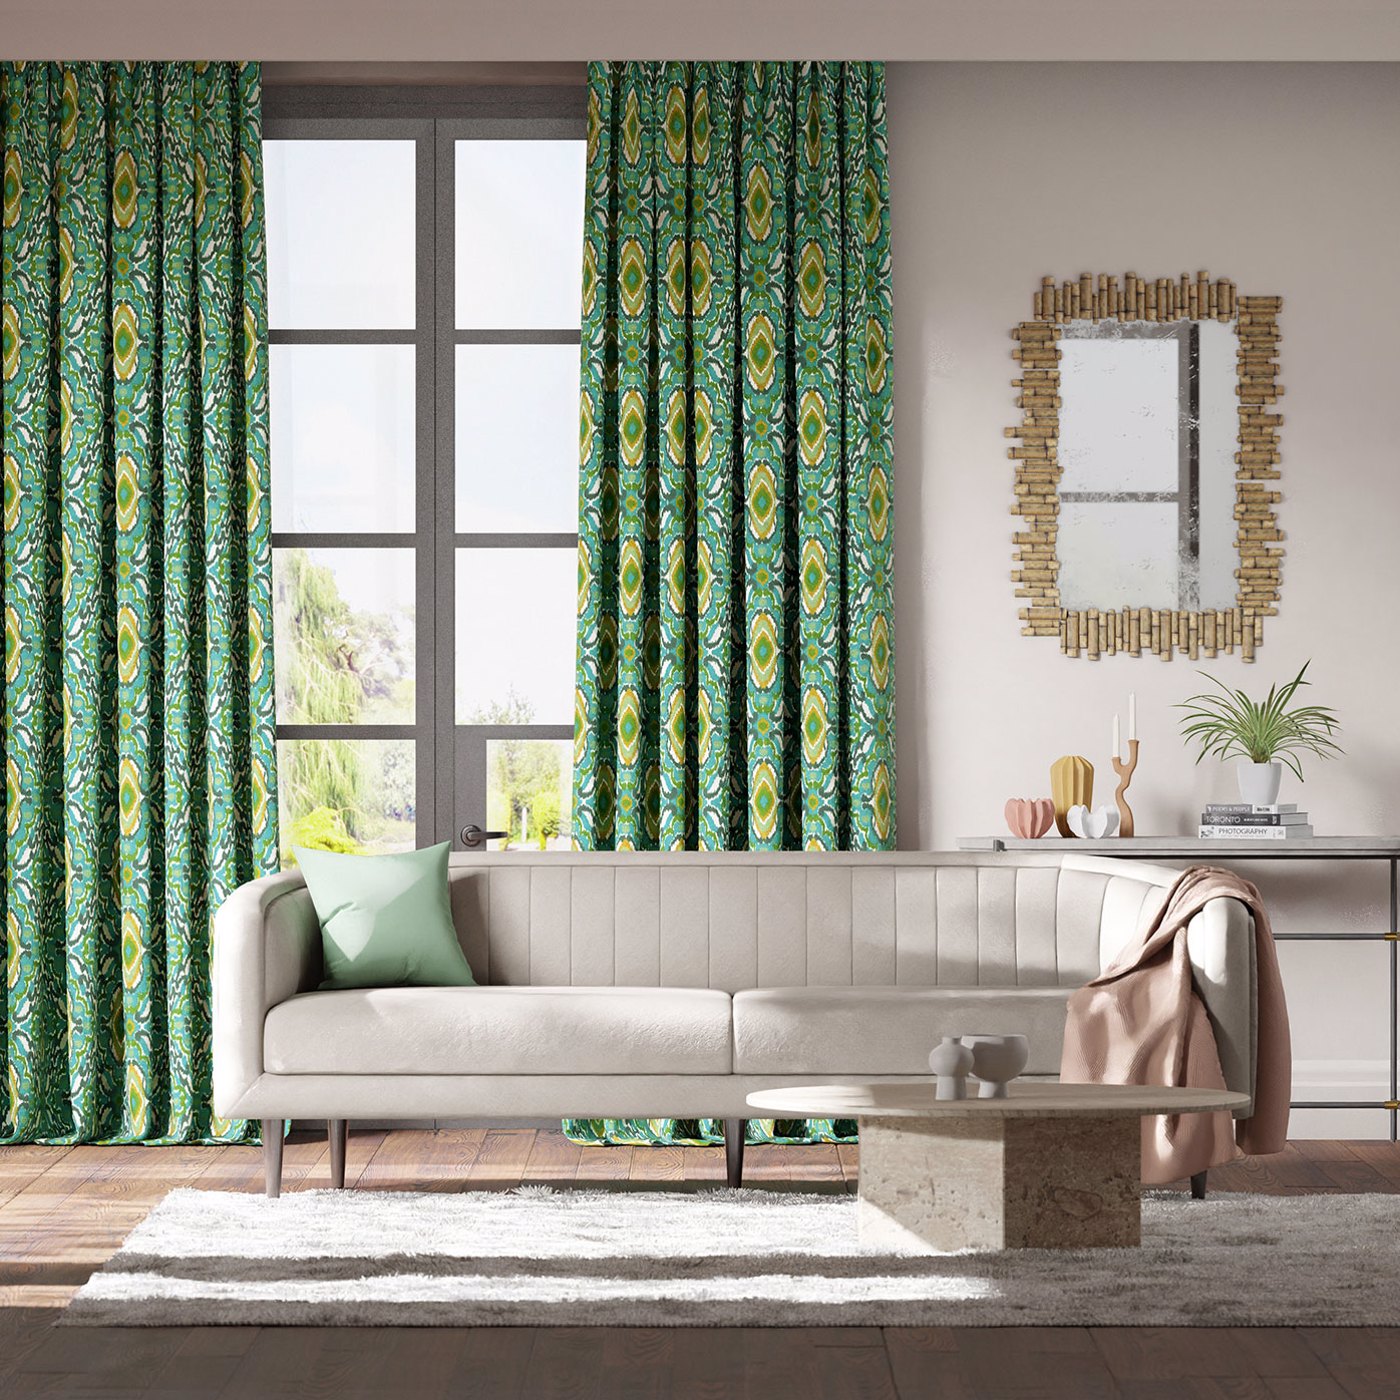 Ixora Emerald/Palm/Chartreuse Fabric by HAR